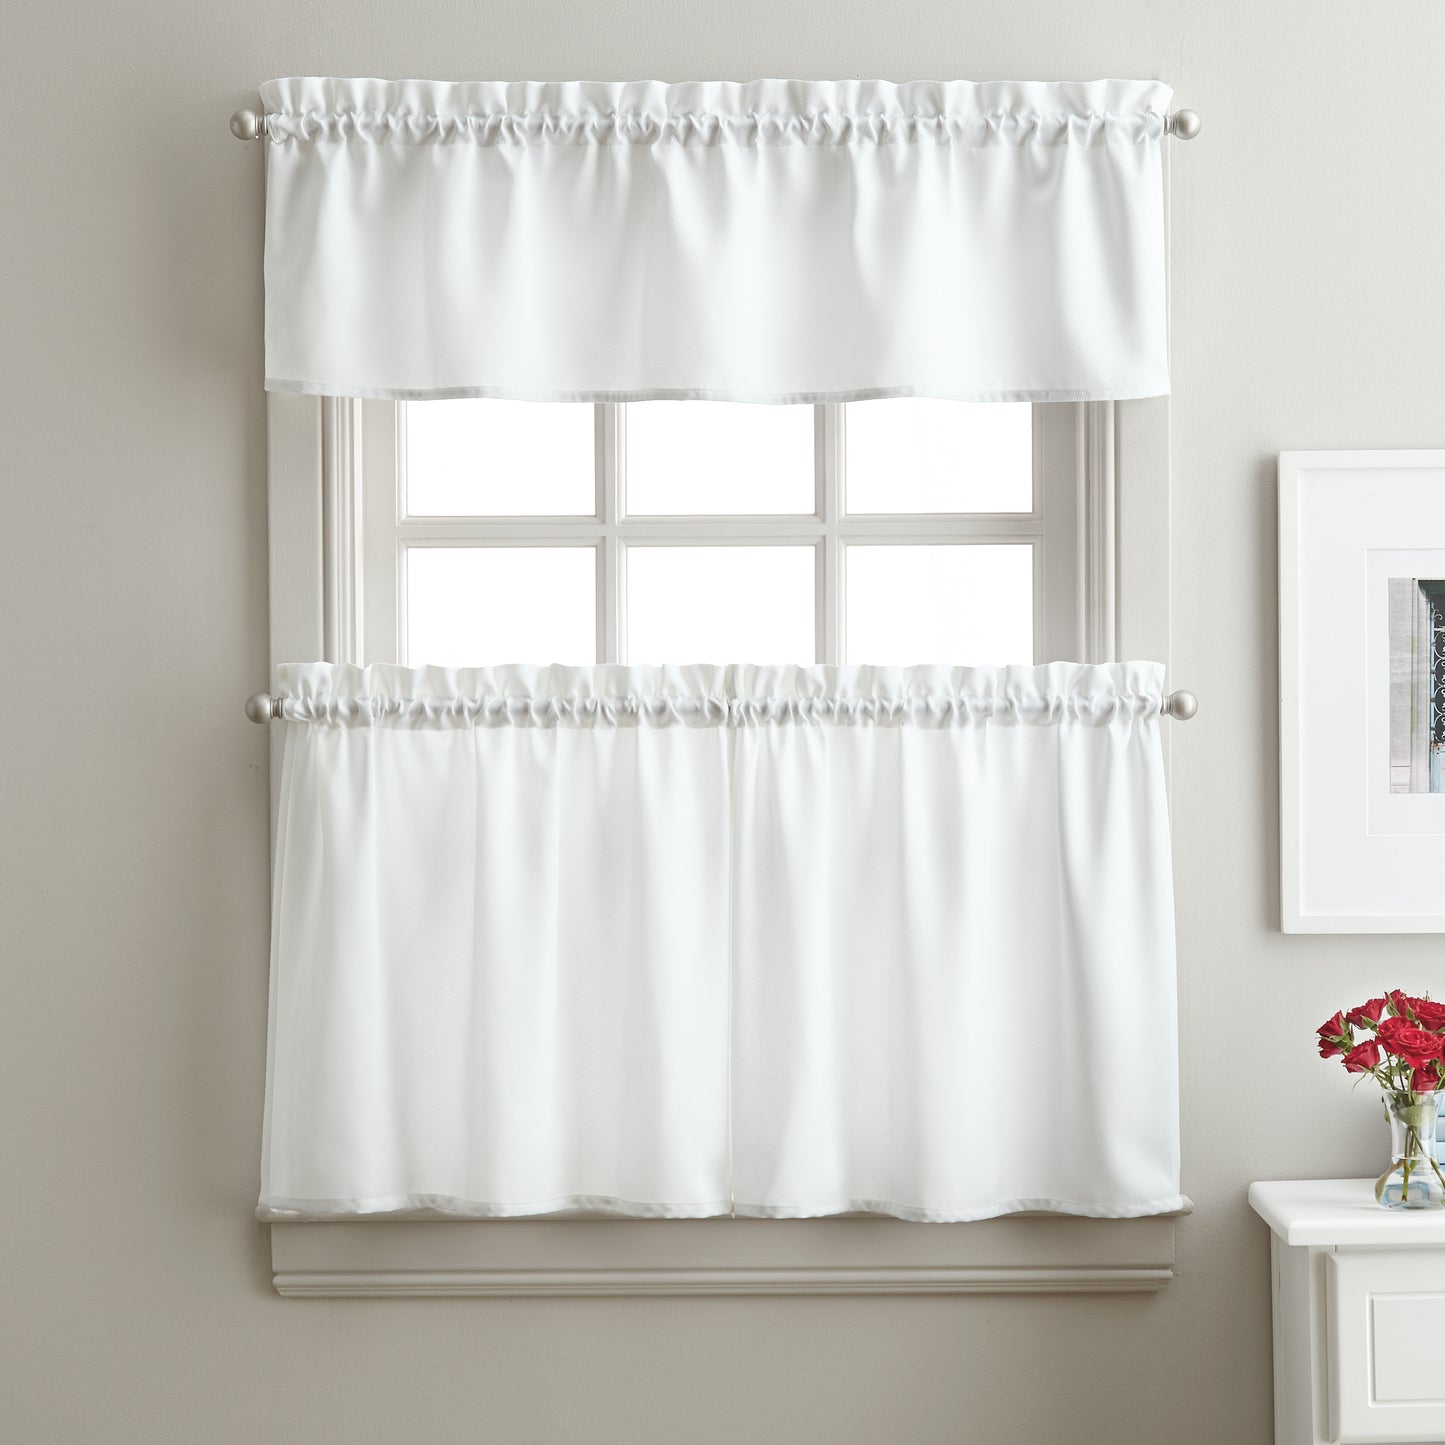 Curtainworks Solid Twill Tiers & Valance Set White